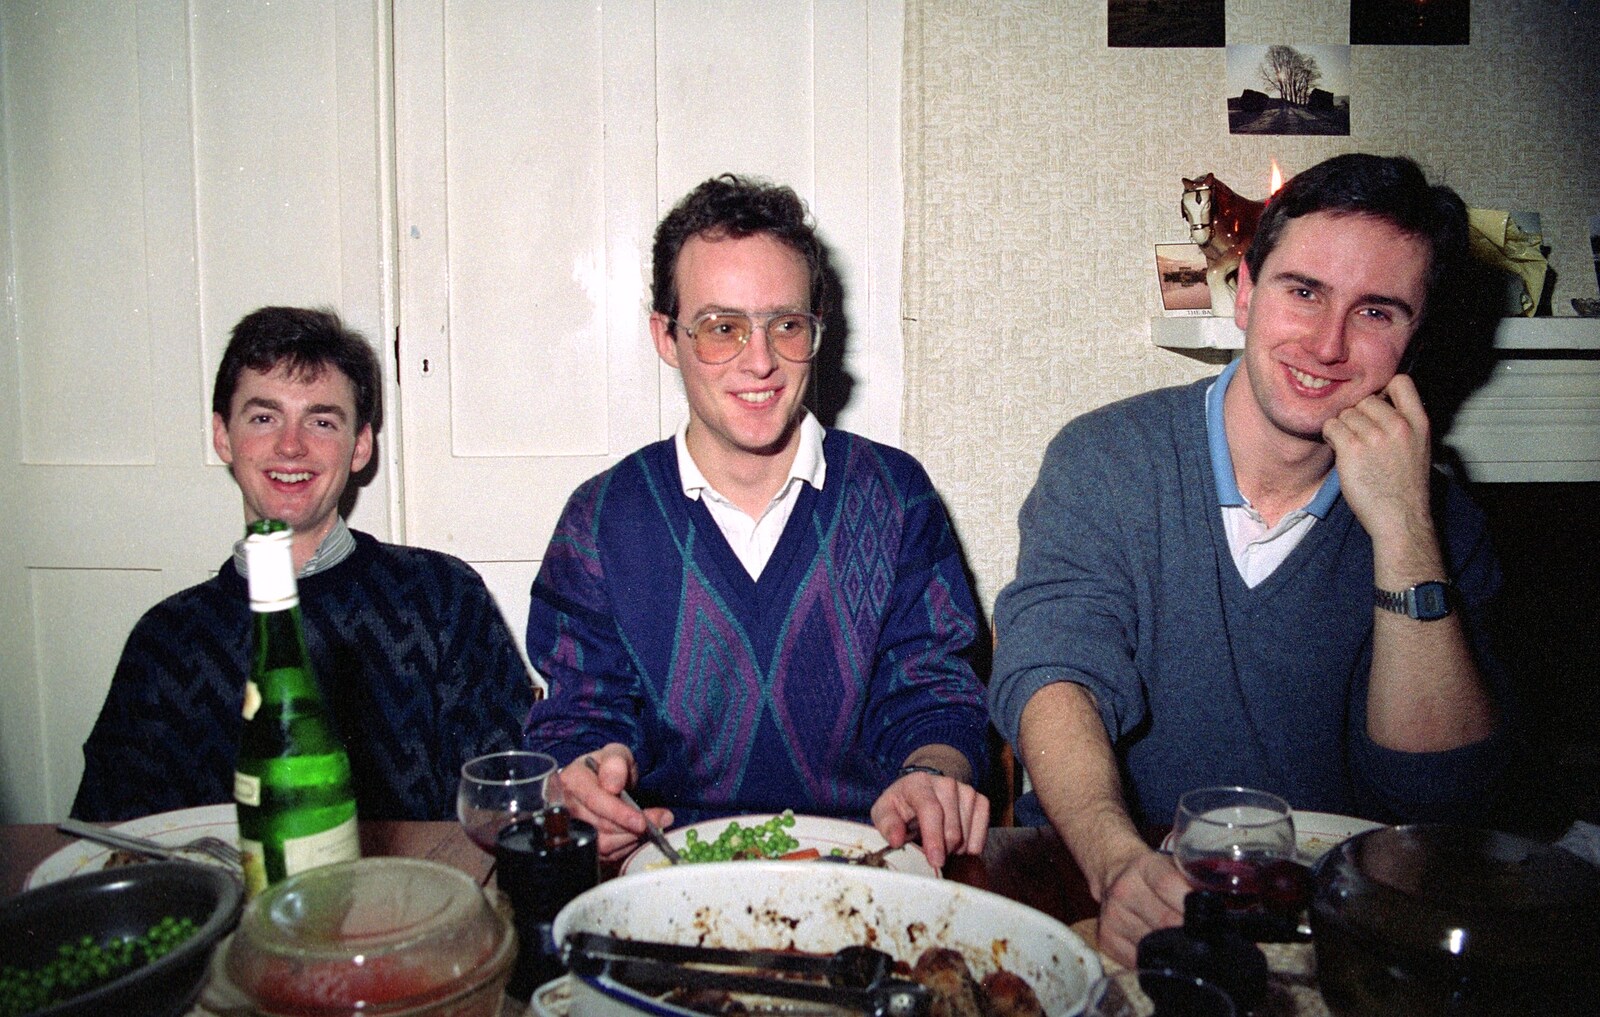 John, Chris and Riki from Uni: A Dinner Party, Harbertonford and Buckfastleigh, Devon - 24th December 1988